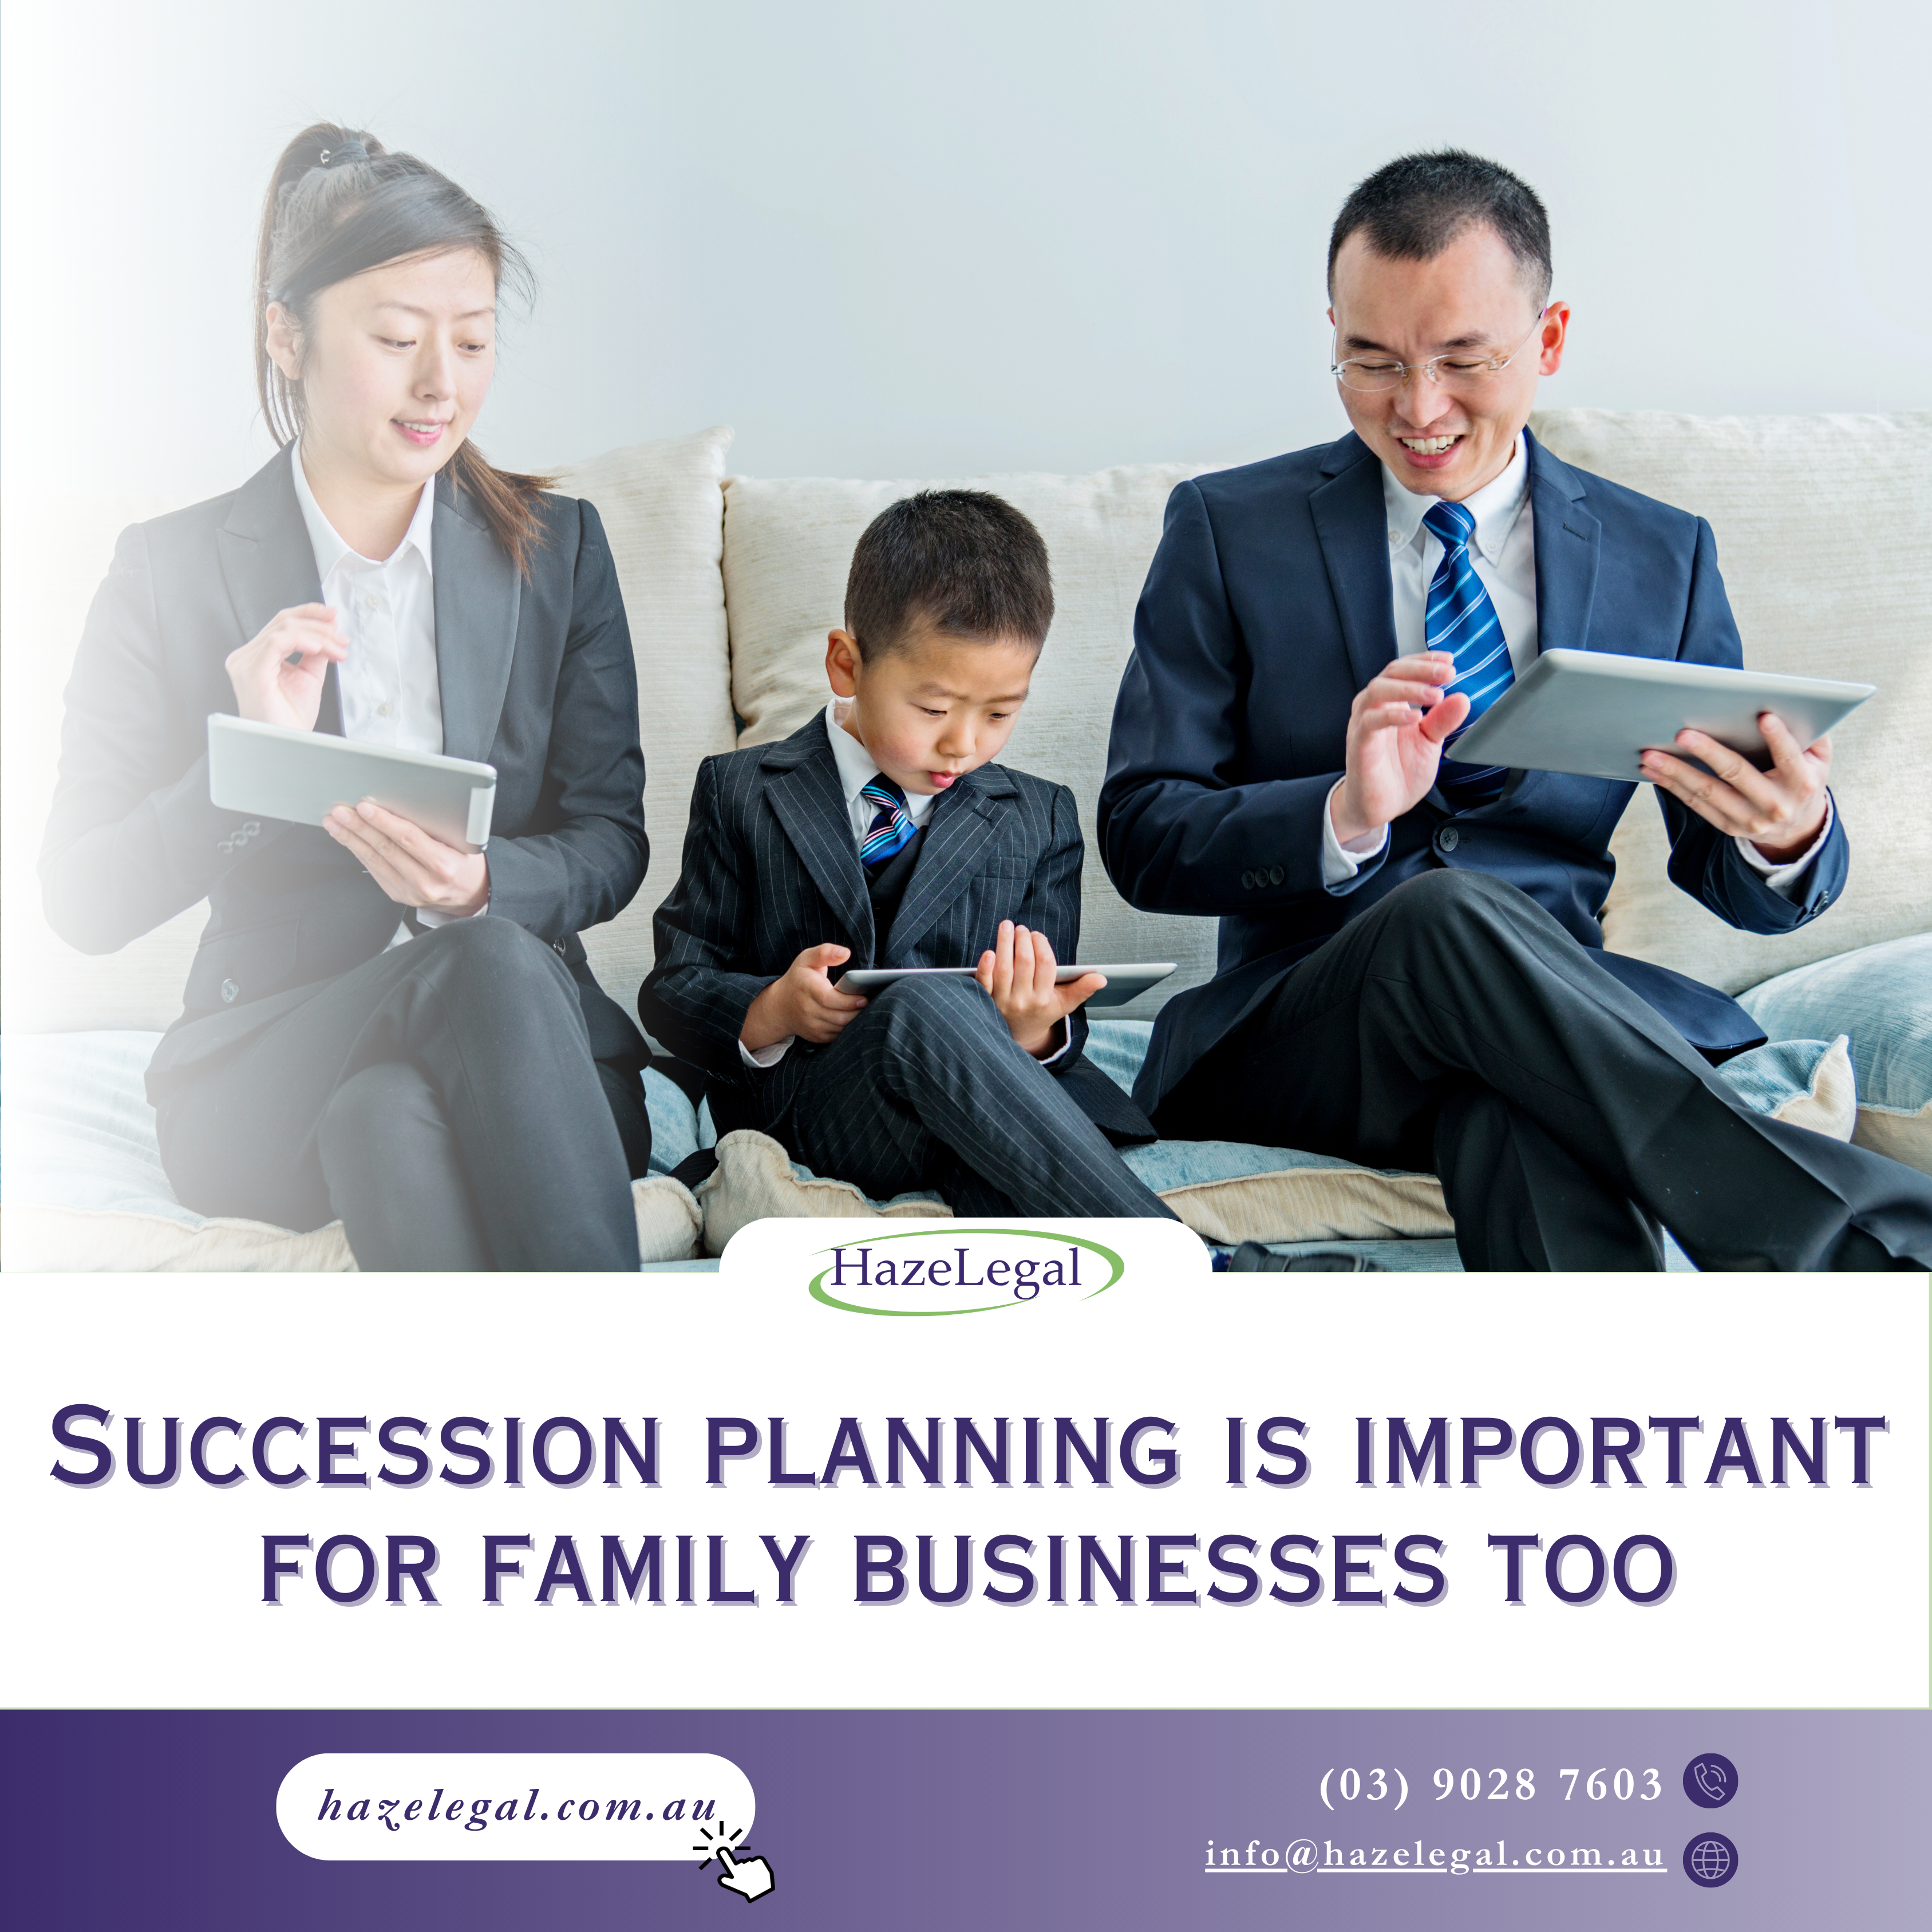 Even for family businesses, succession planning is crucial!